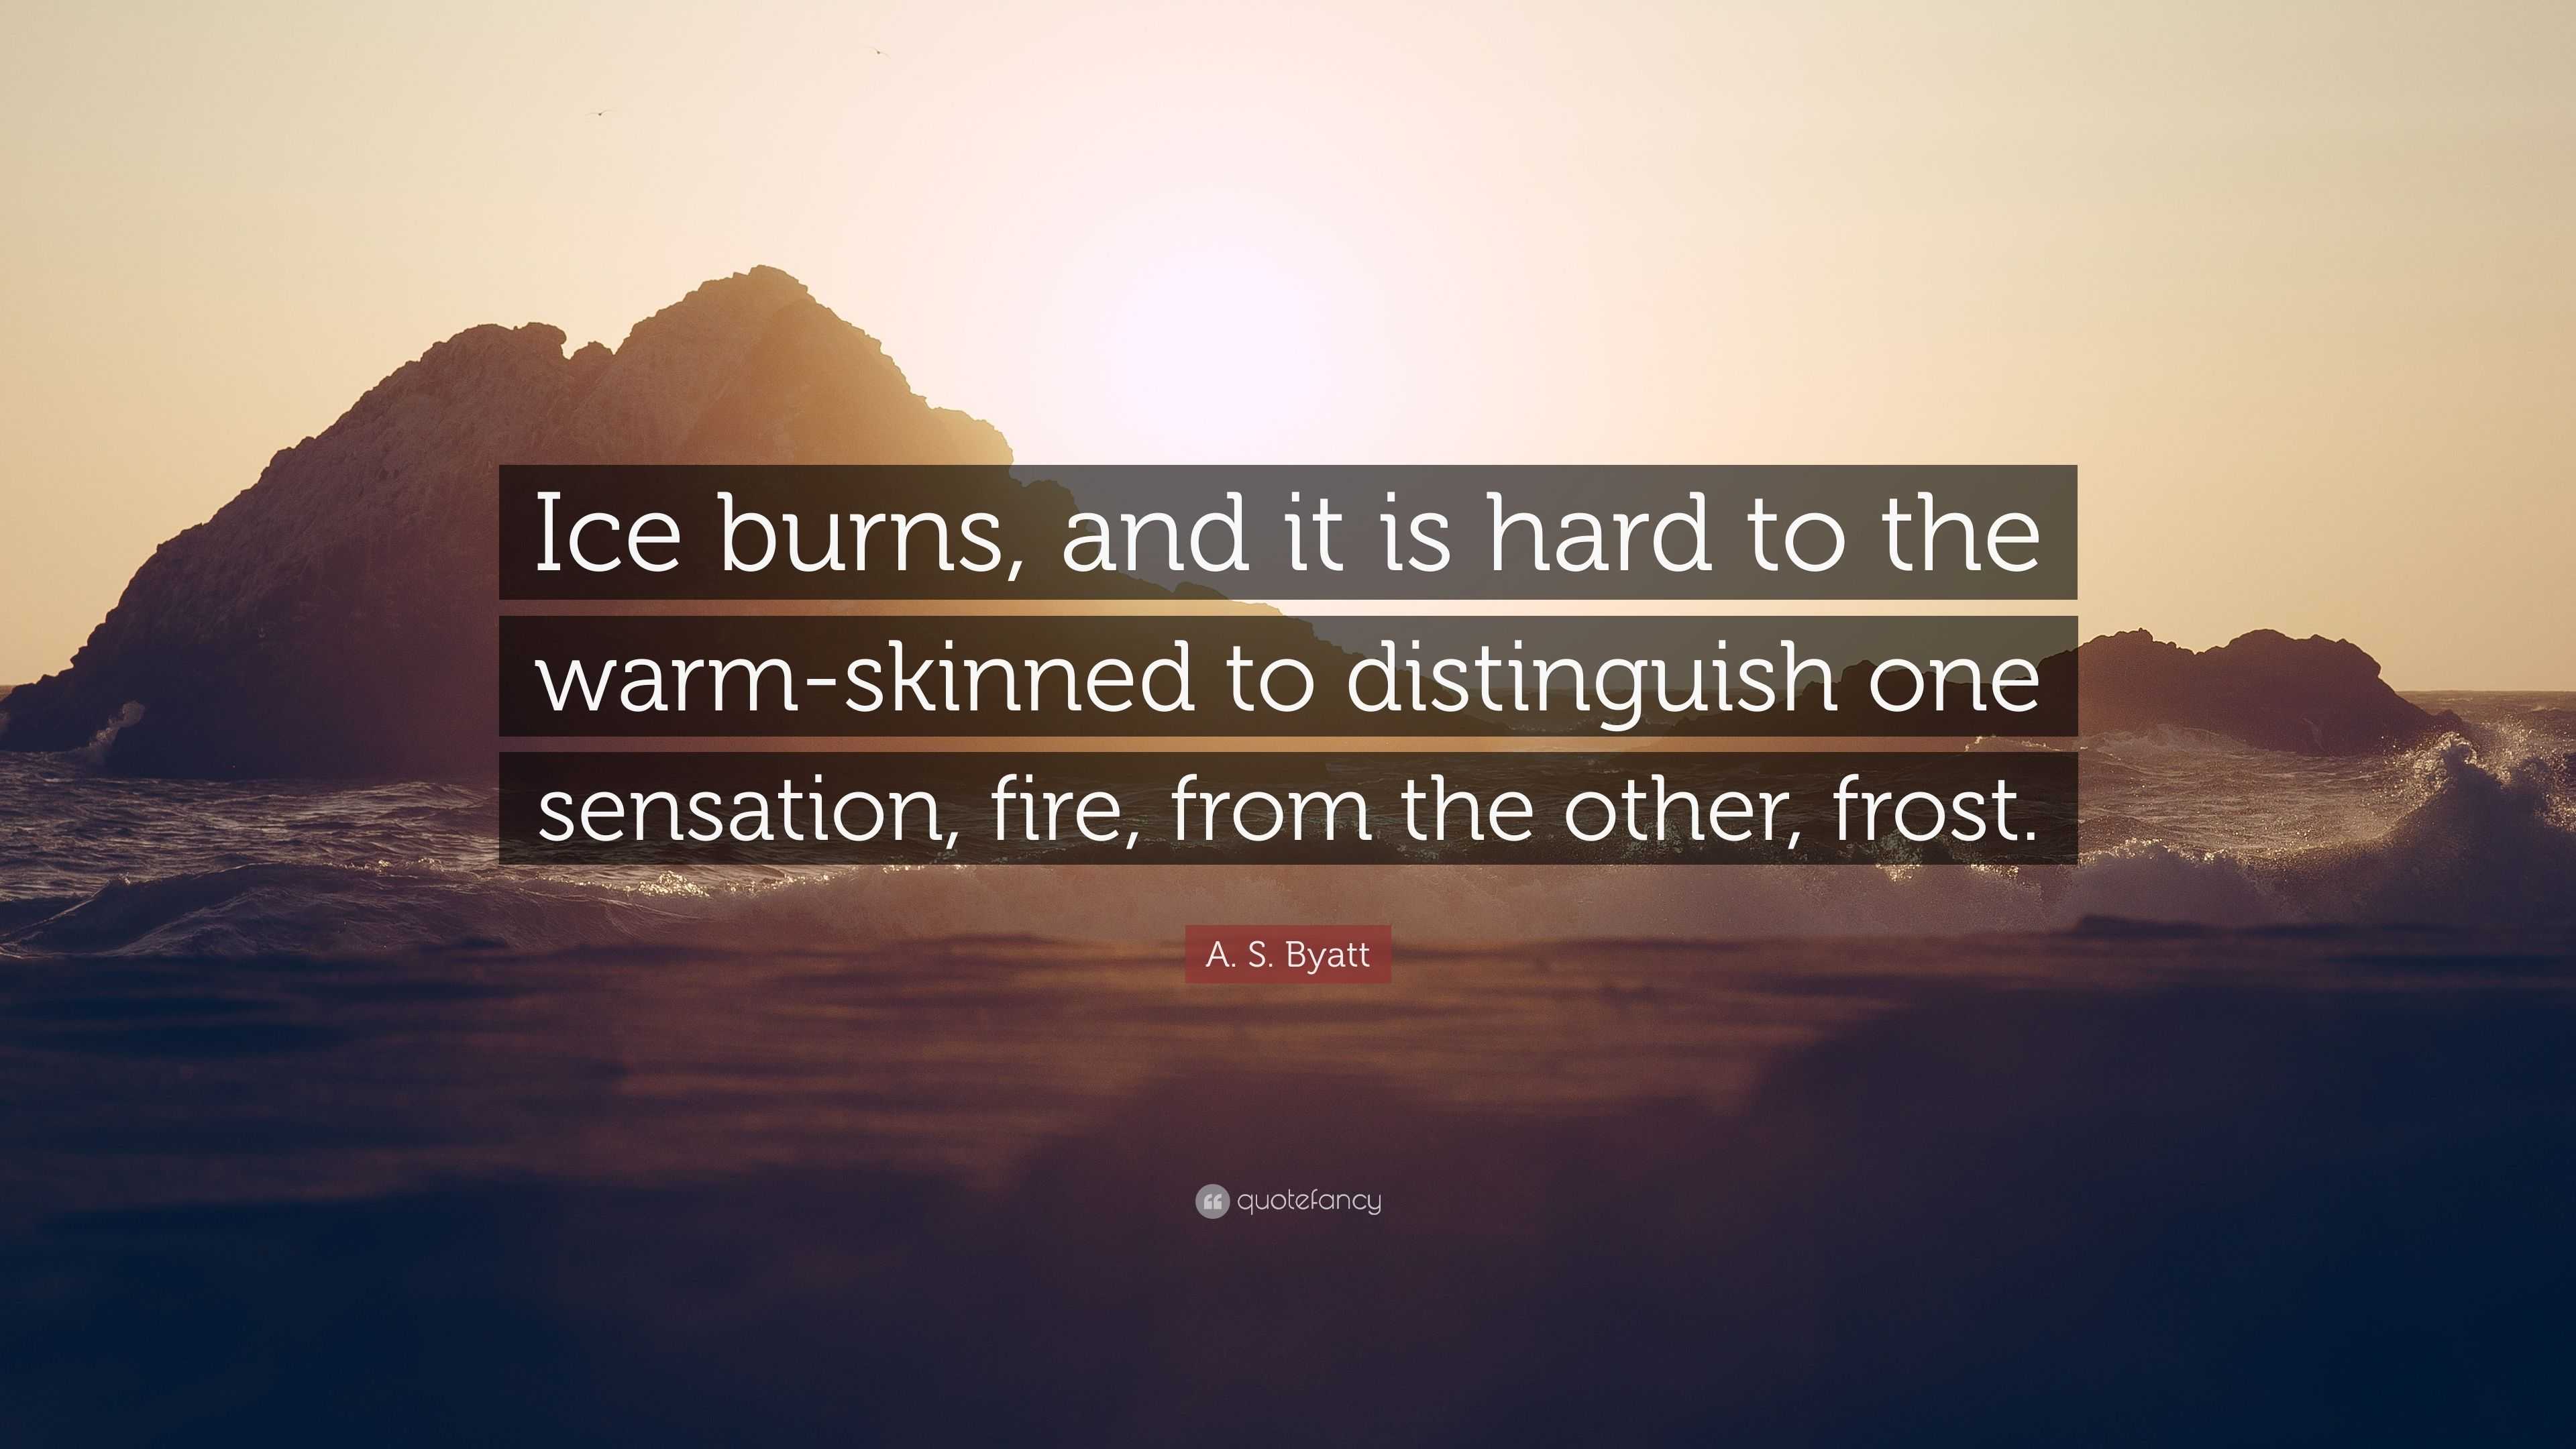 A. S. Byatt Quote: “Ice burns, and it is hard to the warm-skinned to ...